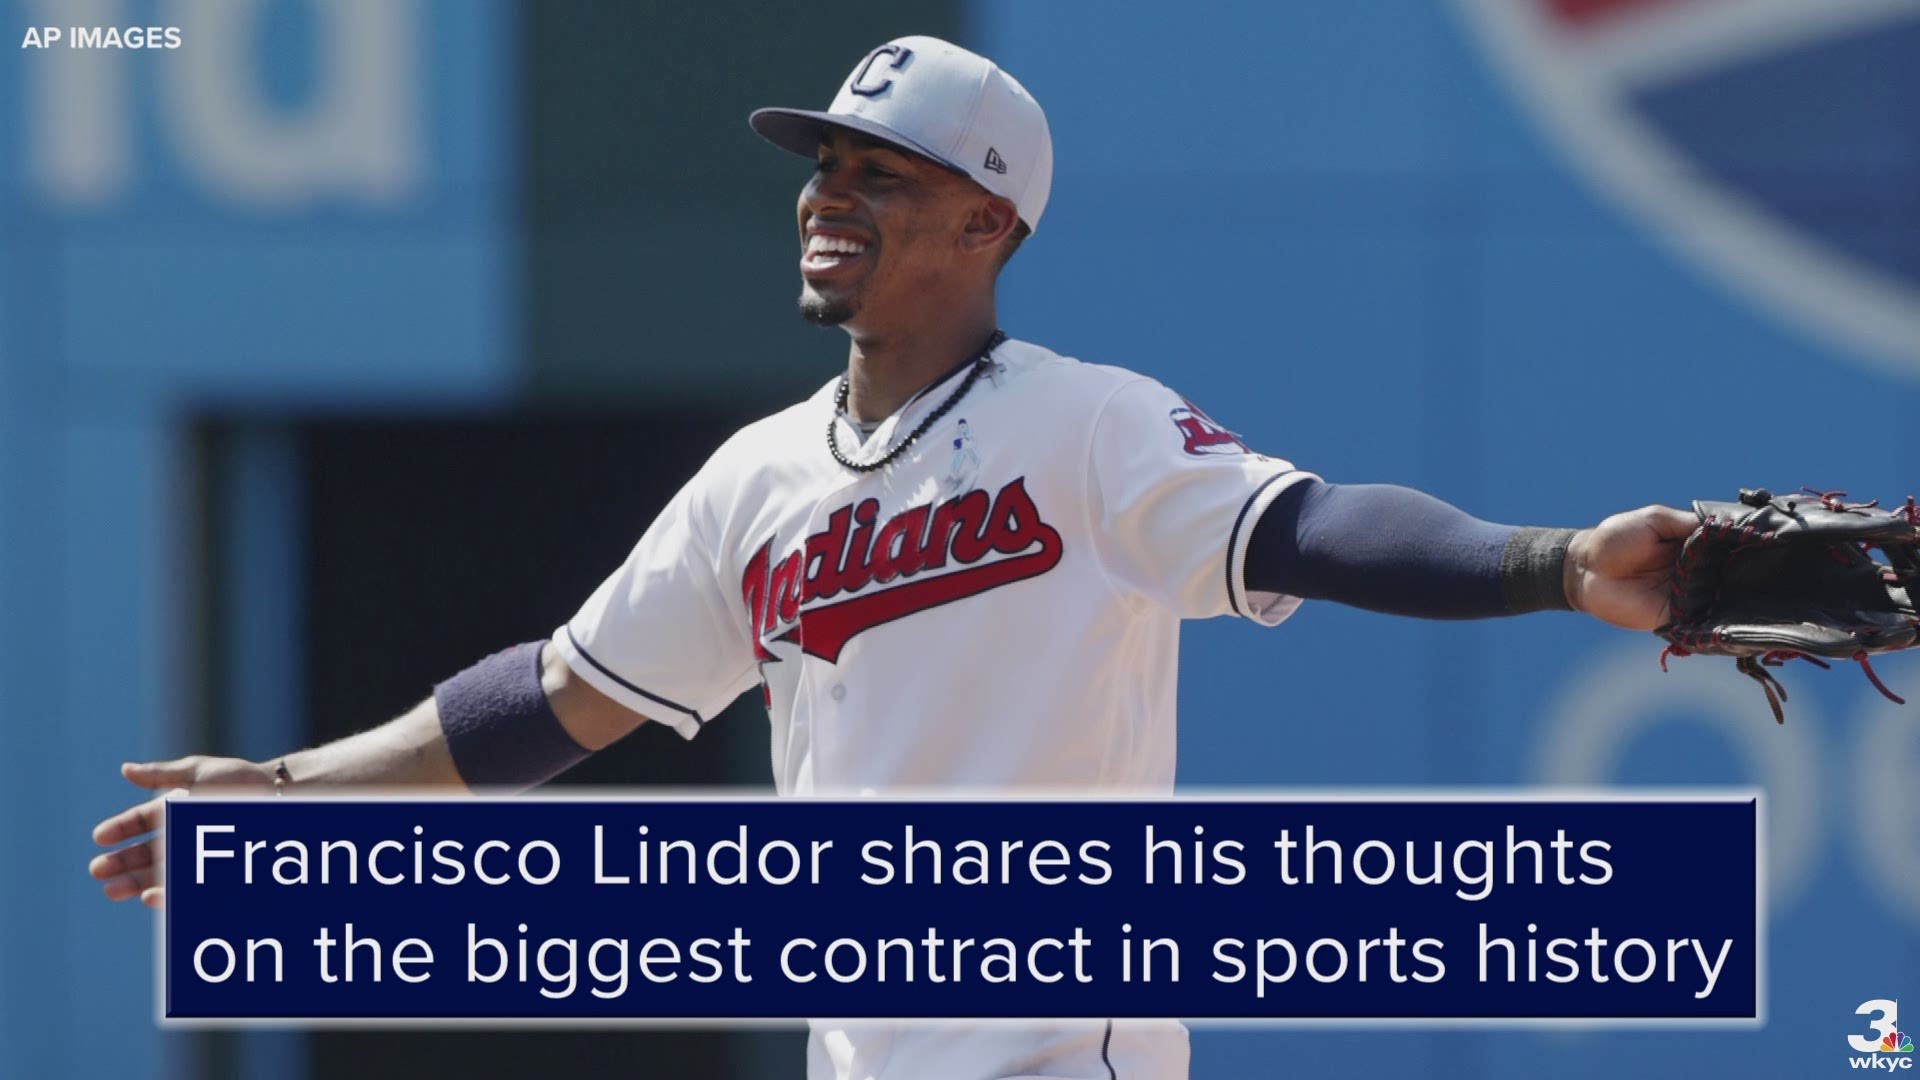 On the same day Los Angeles Angels outfielder Mike Trout signed his record-breaking extension, Cleveland Indians shortstop Francisco Lindor shared his thoughts on the biggest contract in sports history.